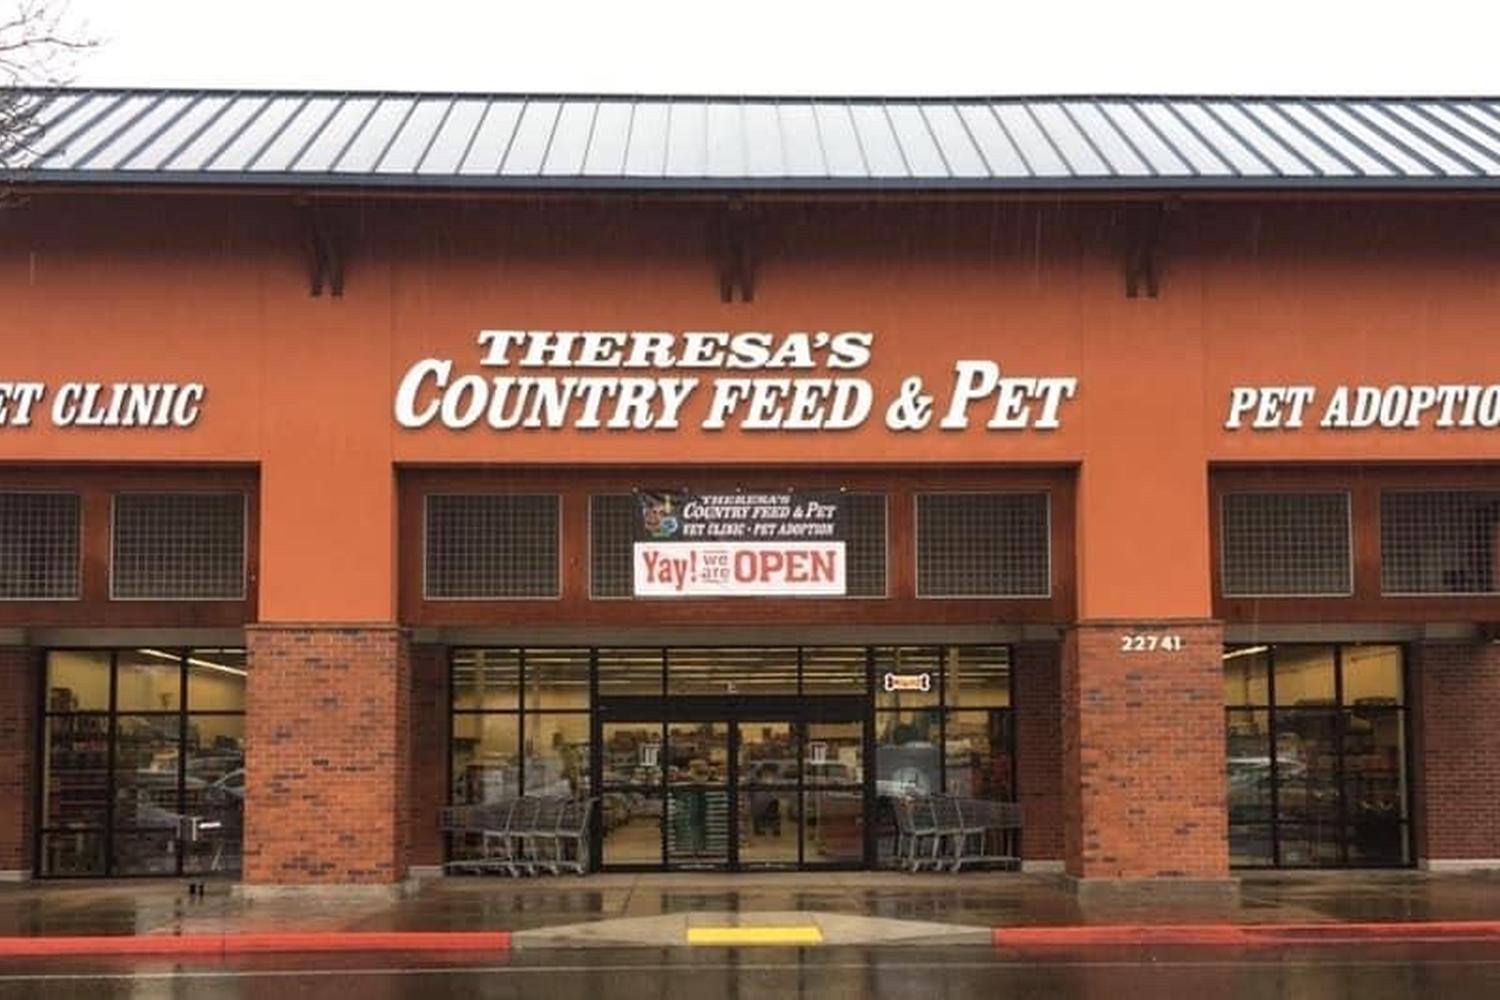 Theresa's Country Feed & Pet - A Trusted Partner of Health Extension